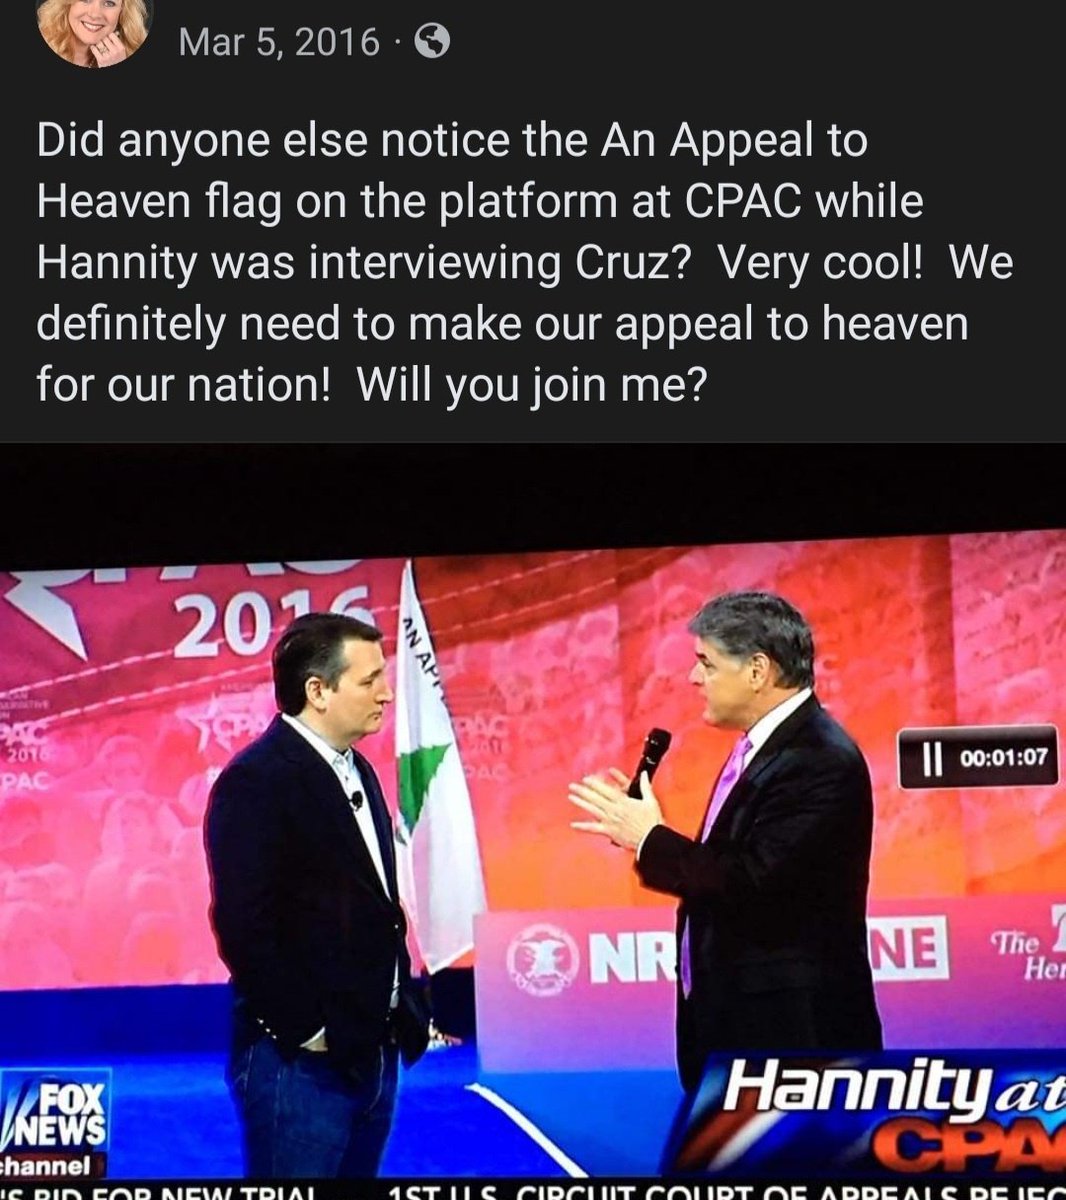 👀 Flashback to when CPAC had the Appeal to heaven flag typically associated with the Christian Dominionist New Apostolic Reformation Movement on their stage in 2016